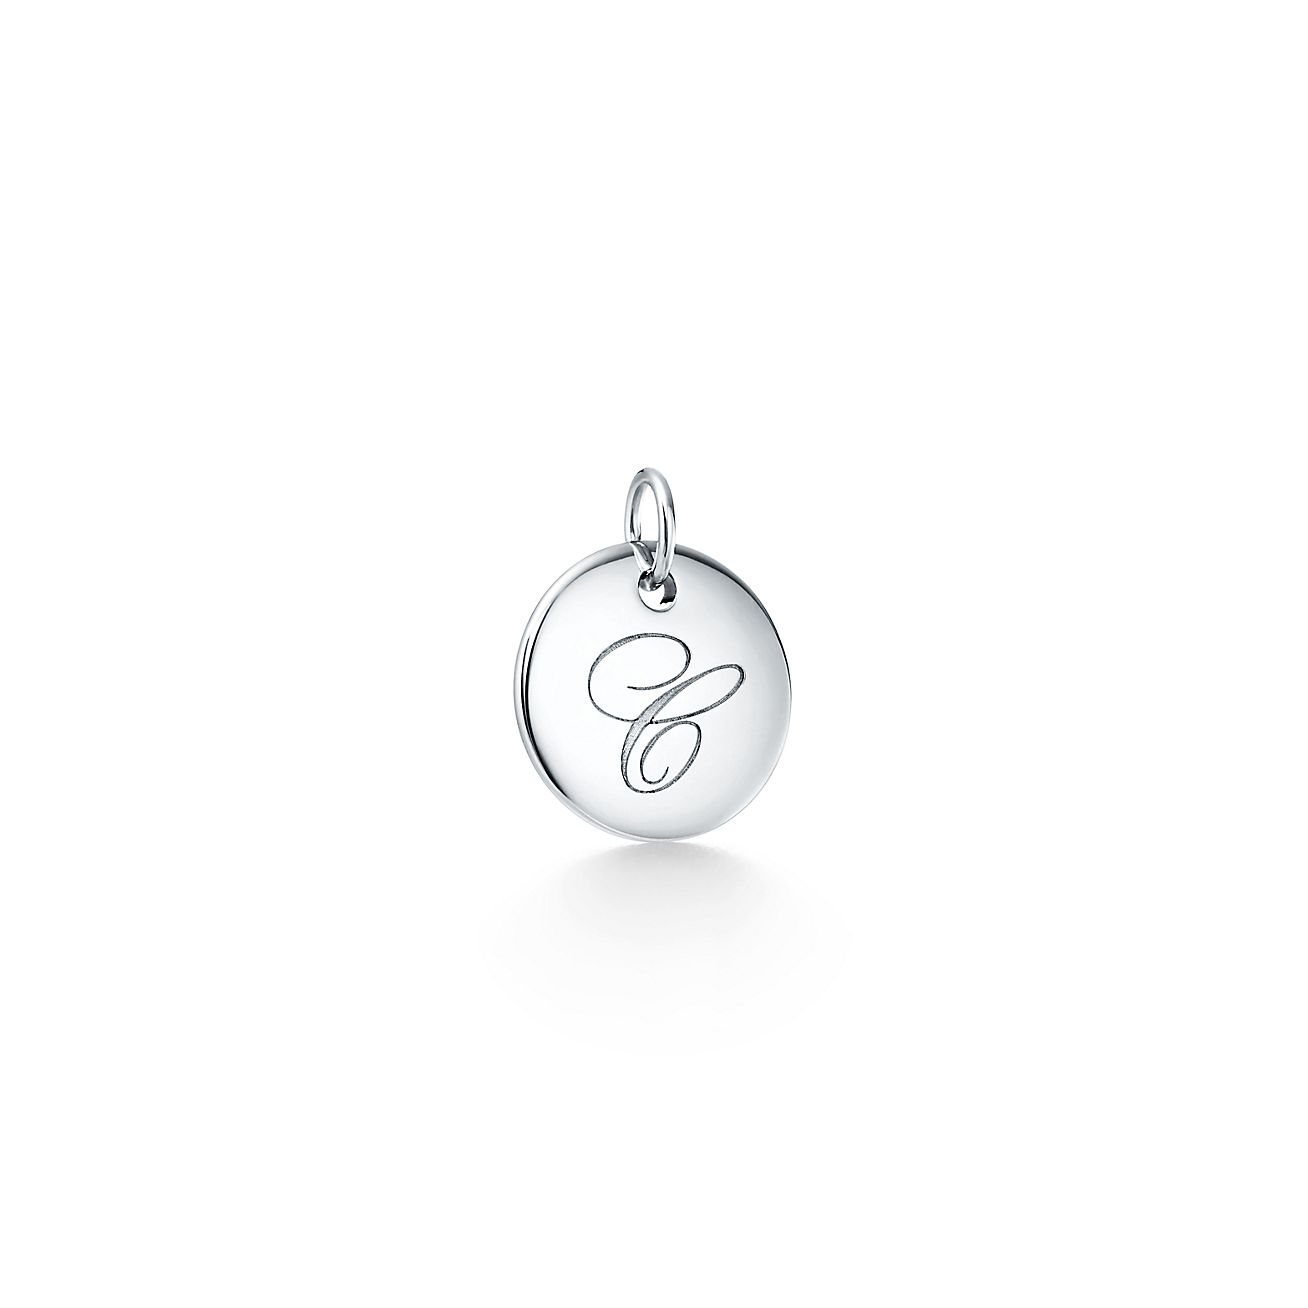 Tiffany Notes C Disc Charm in Silver, A 